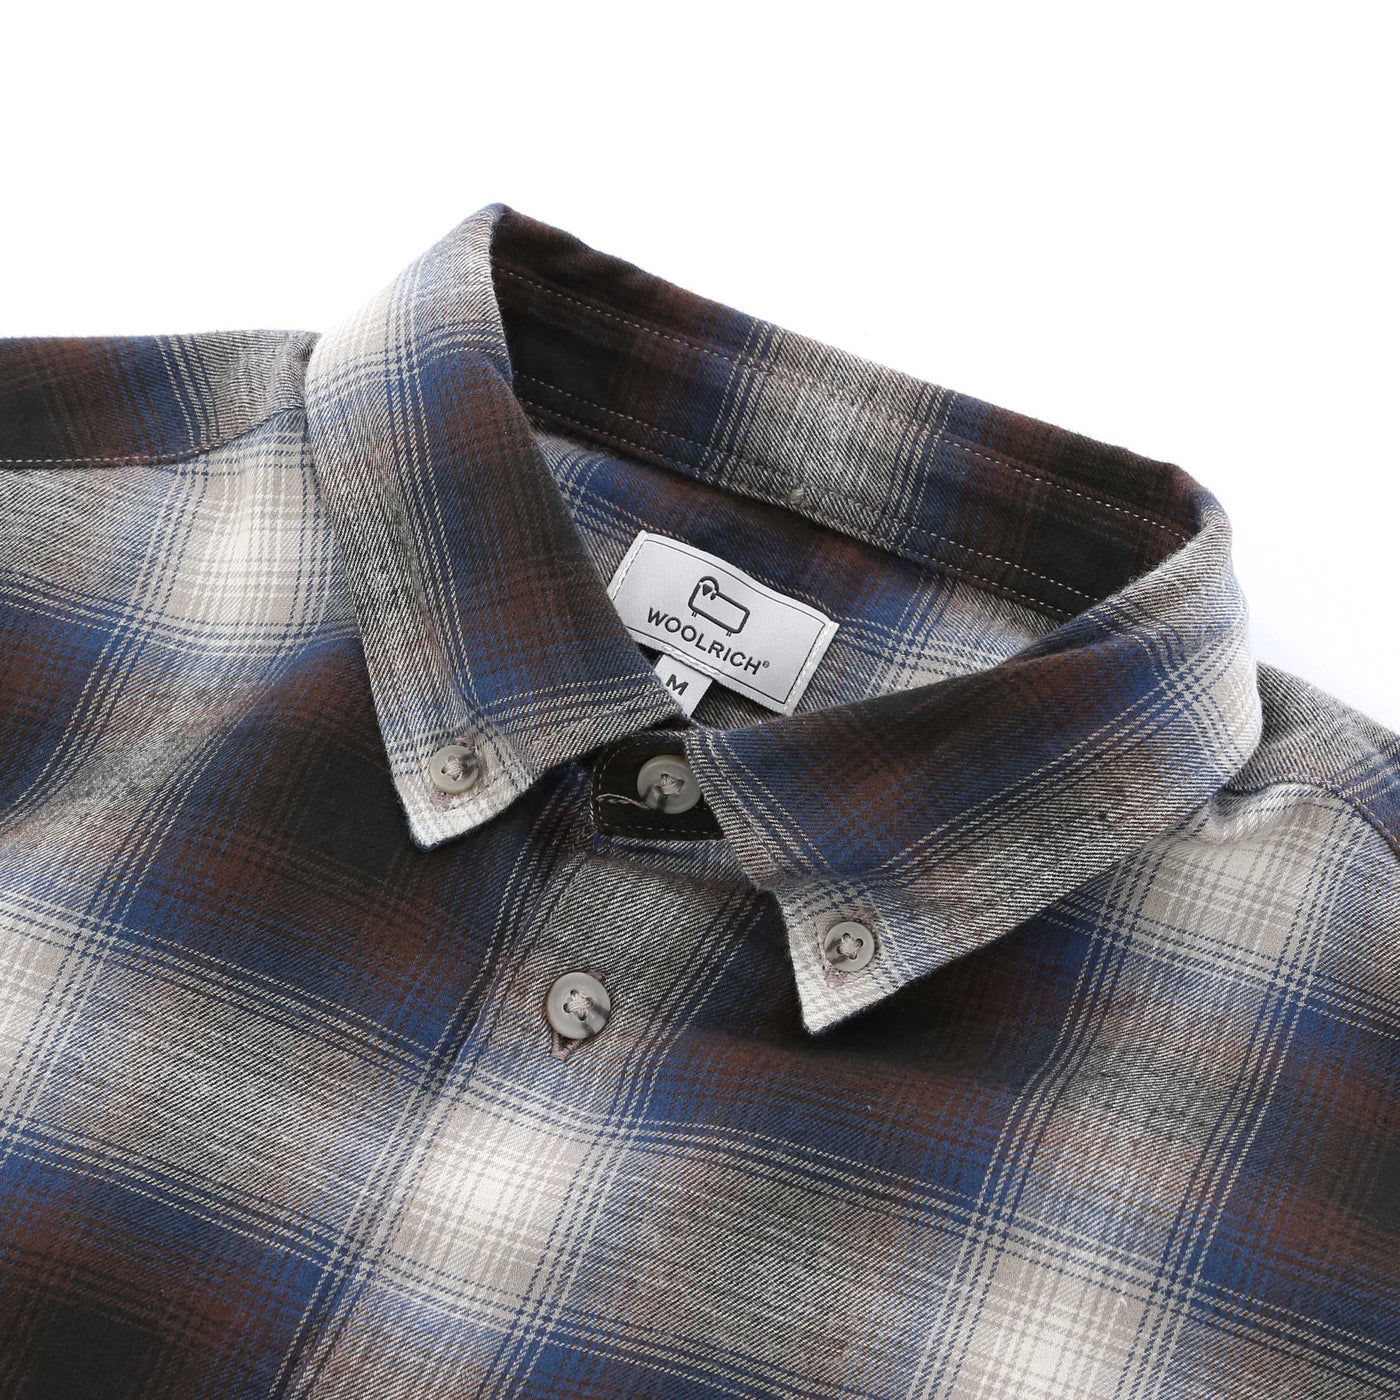 Woolrich Light Flannel Check Shirt in Grey Check Collar